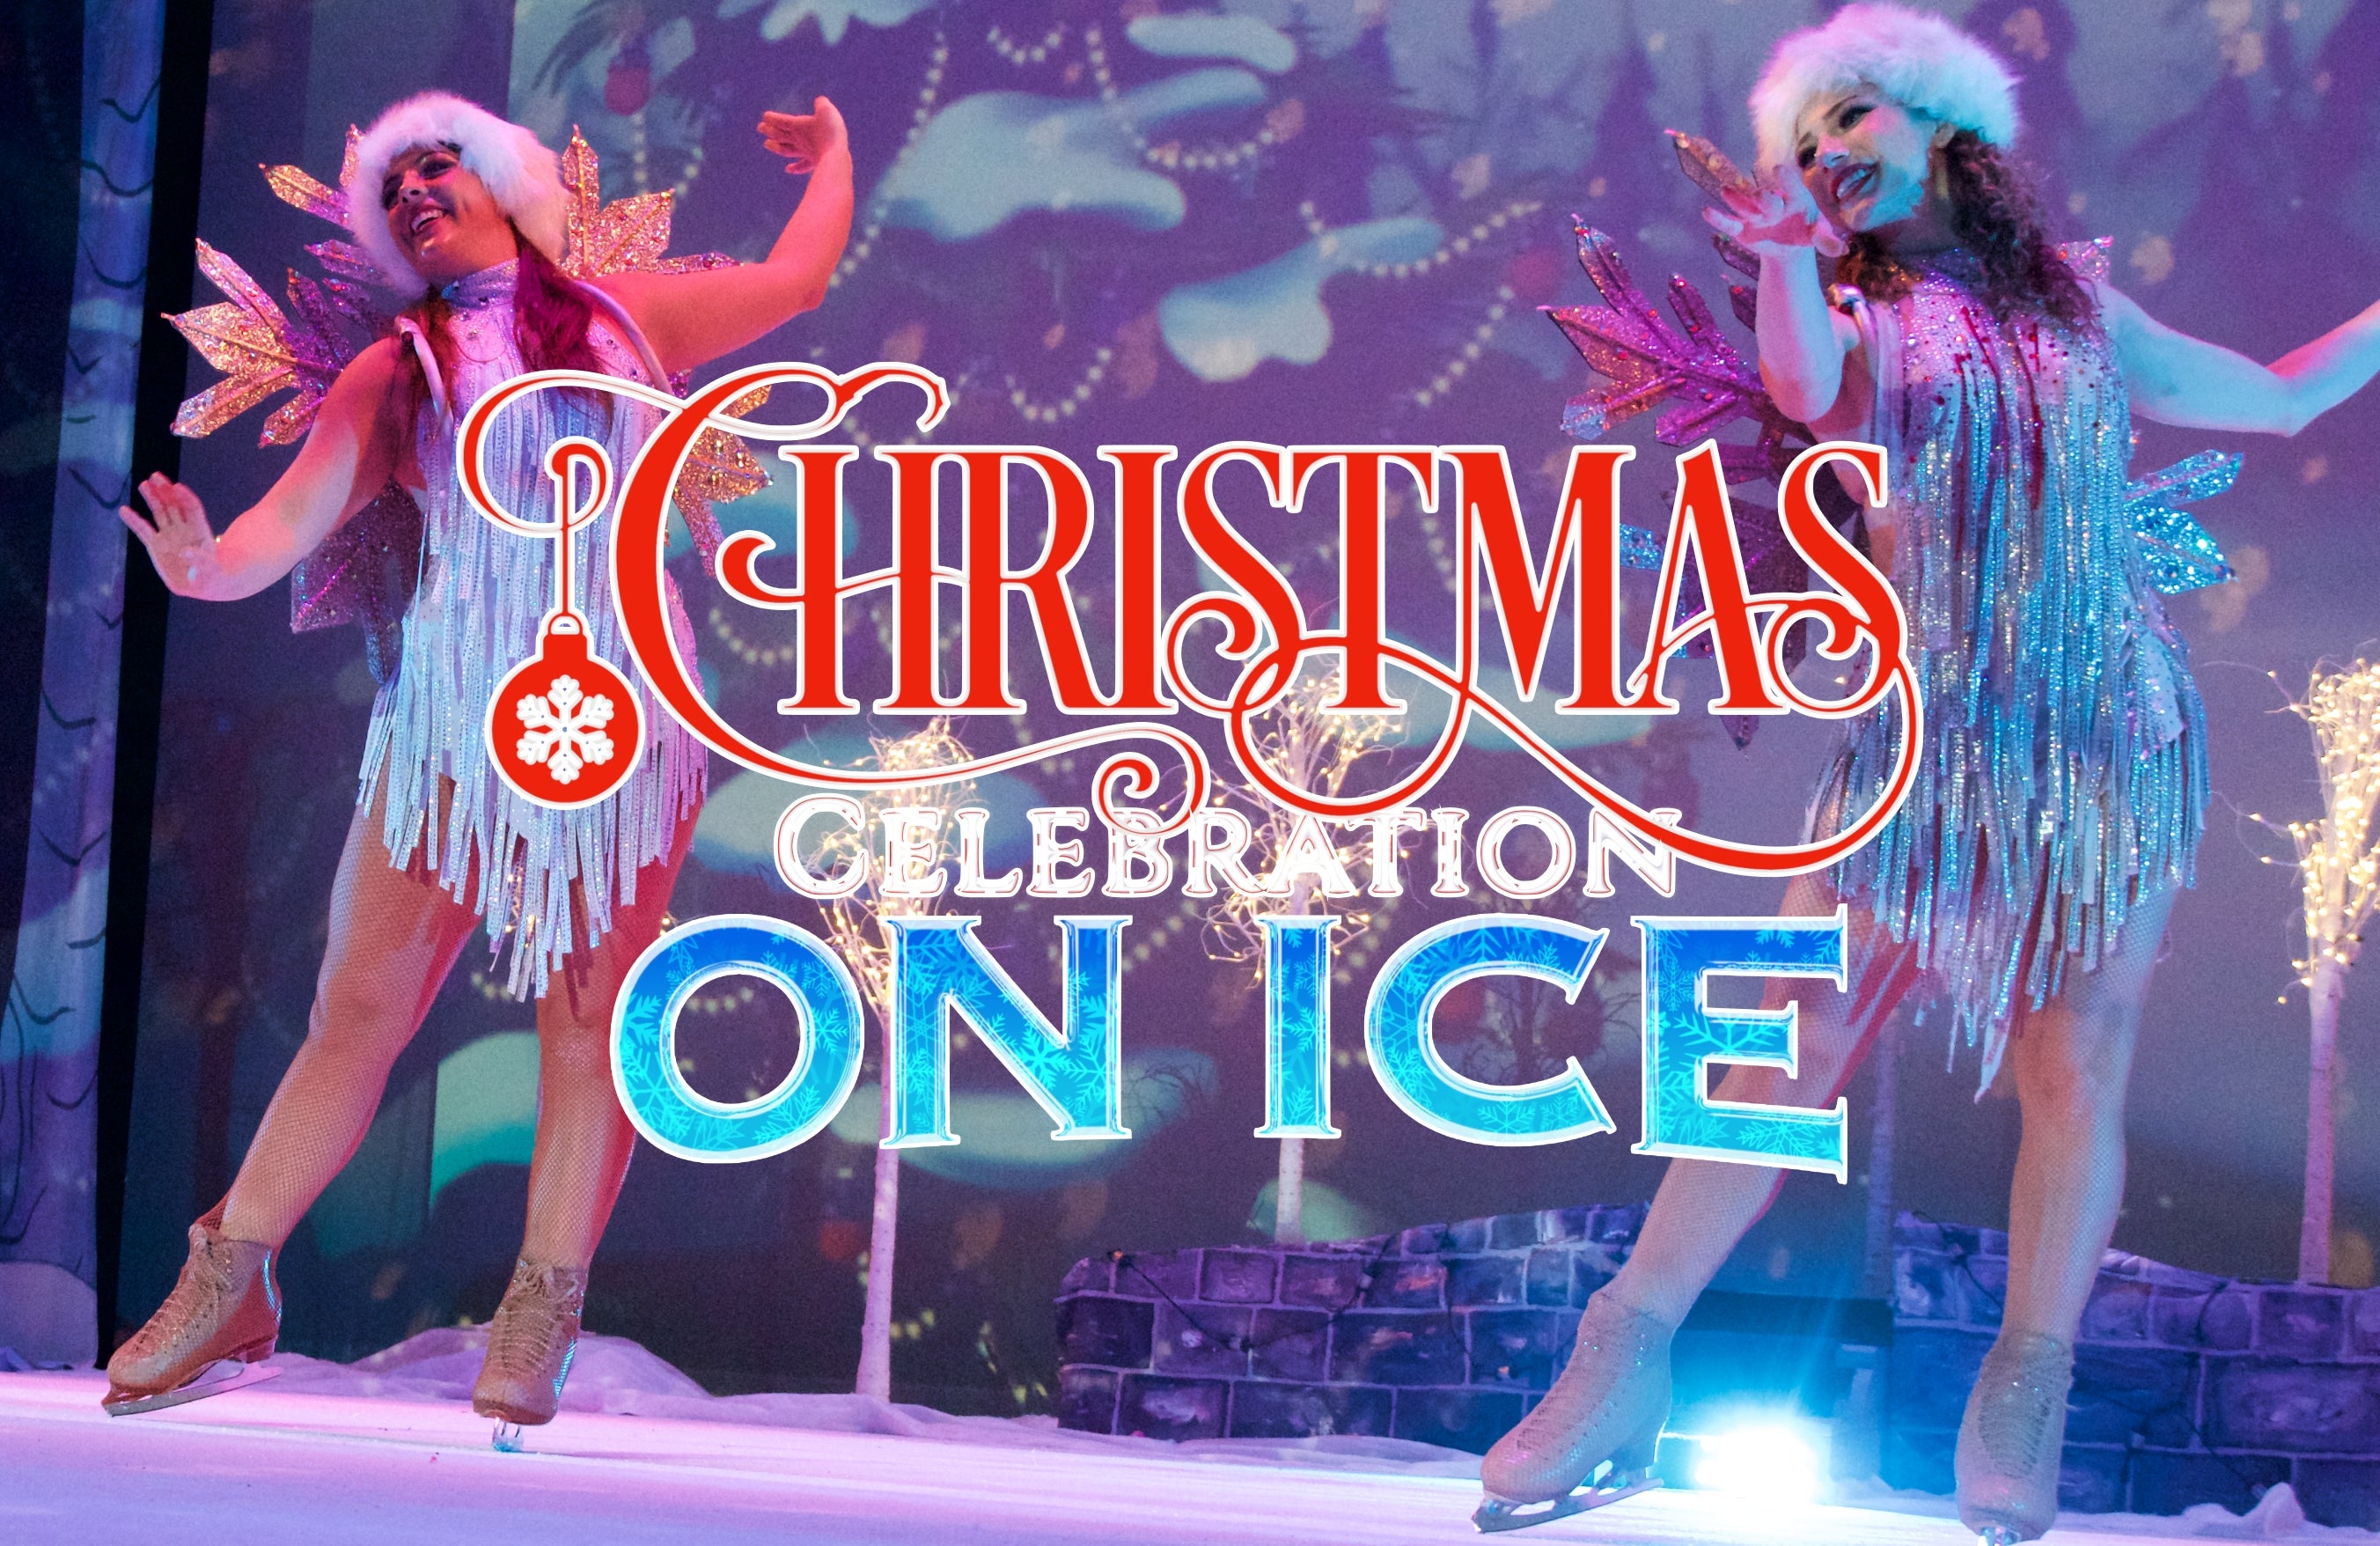 Christmas Celebration on Ice free presale password for early tickets in Bangor